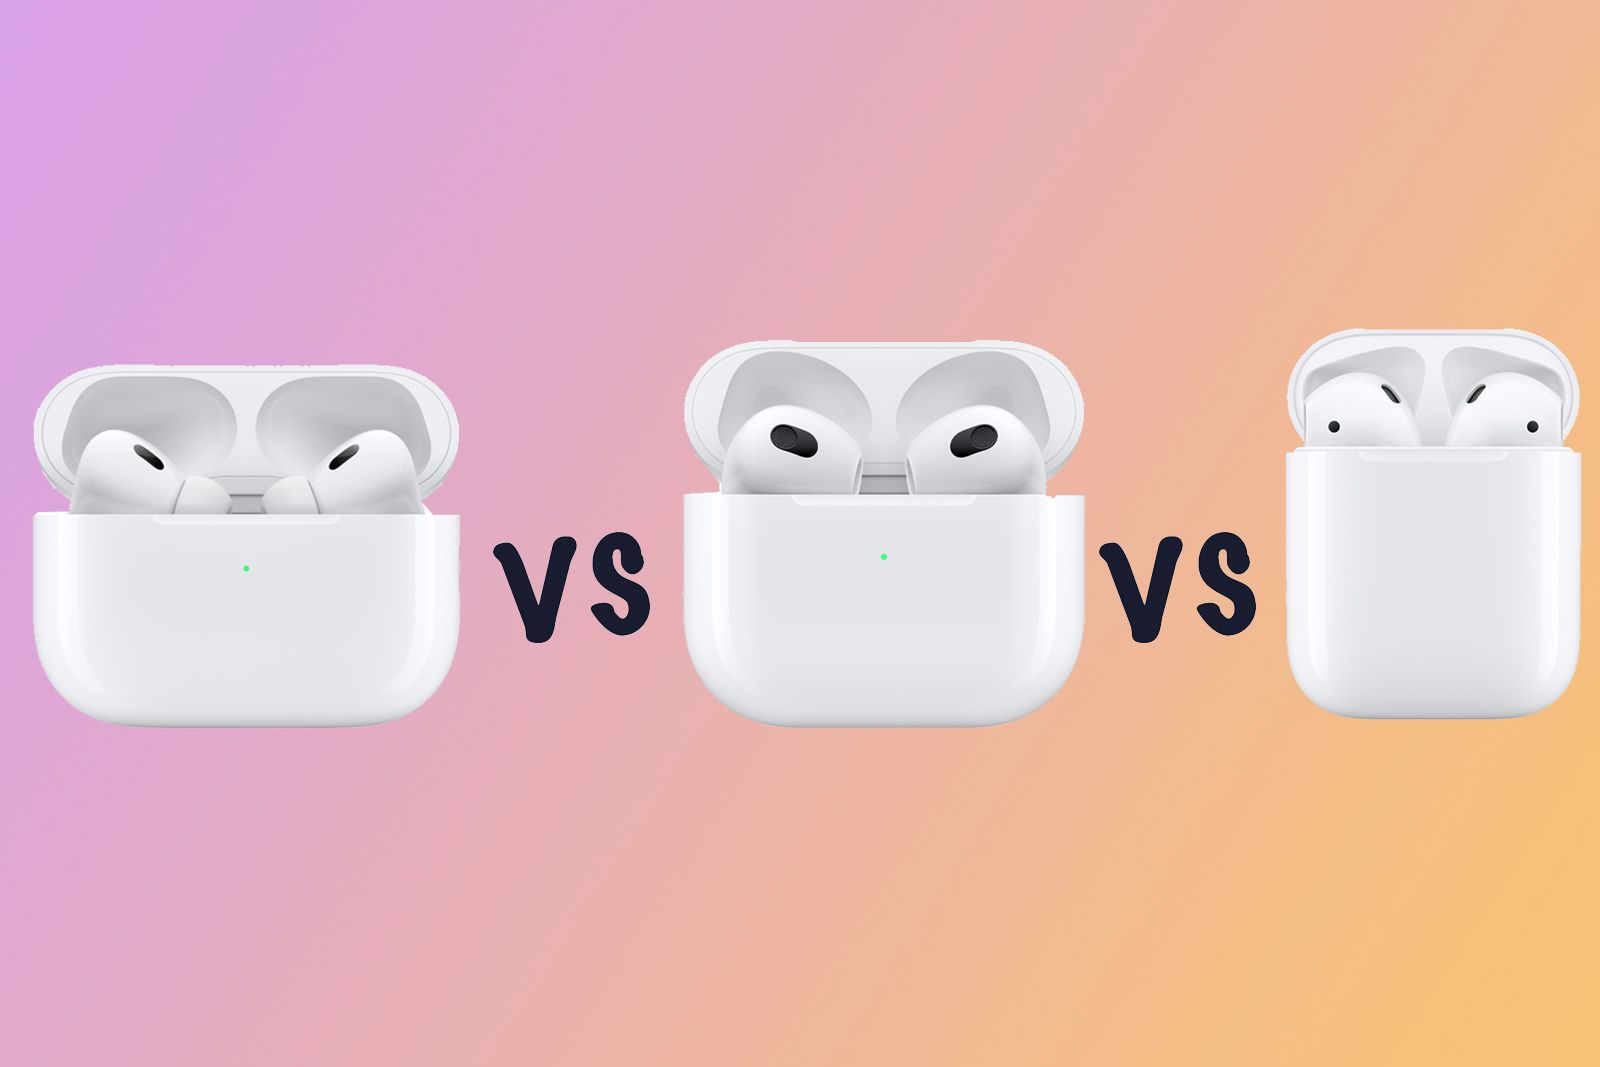 tilbagebetaling Skifte tøj kuffert Apple AirPods Pro 2 vs AirPods 3 vs AirPods 2: Differences